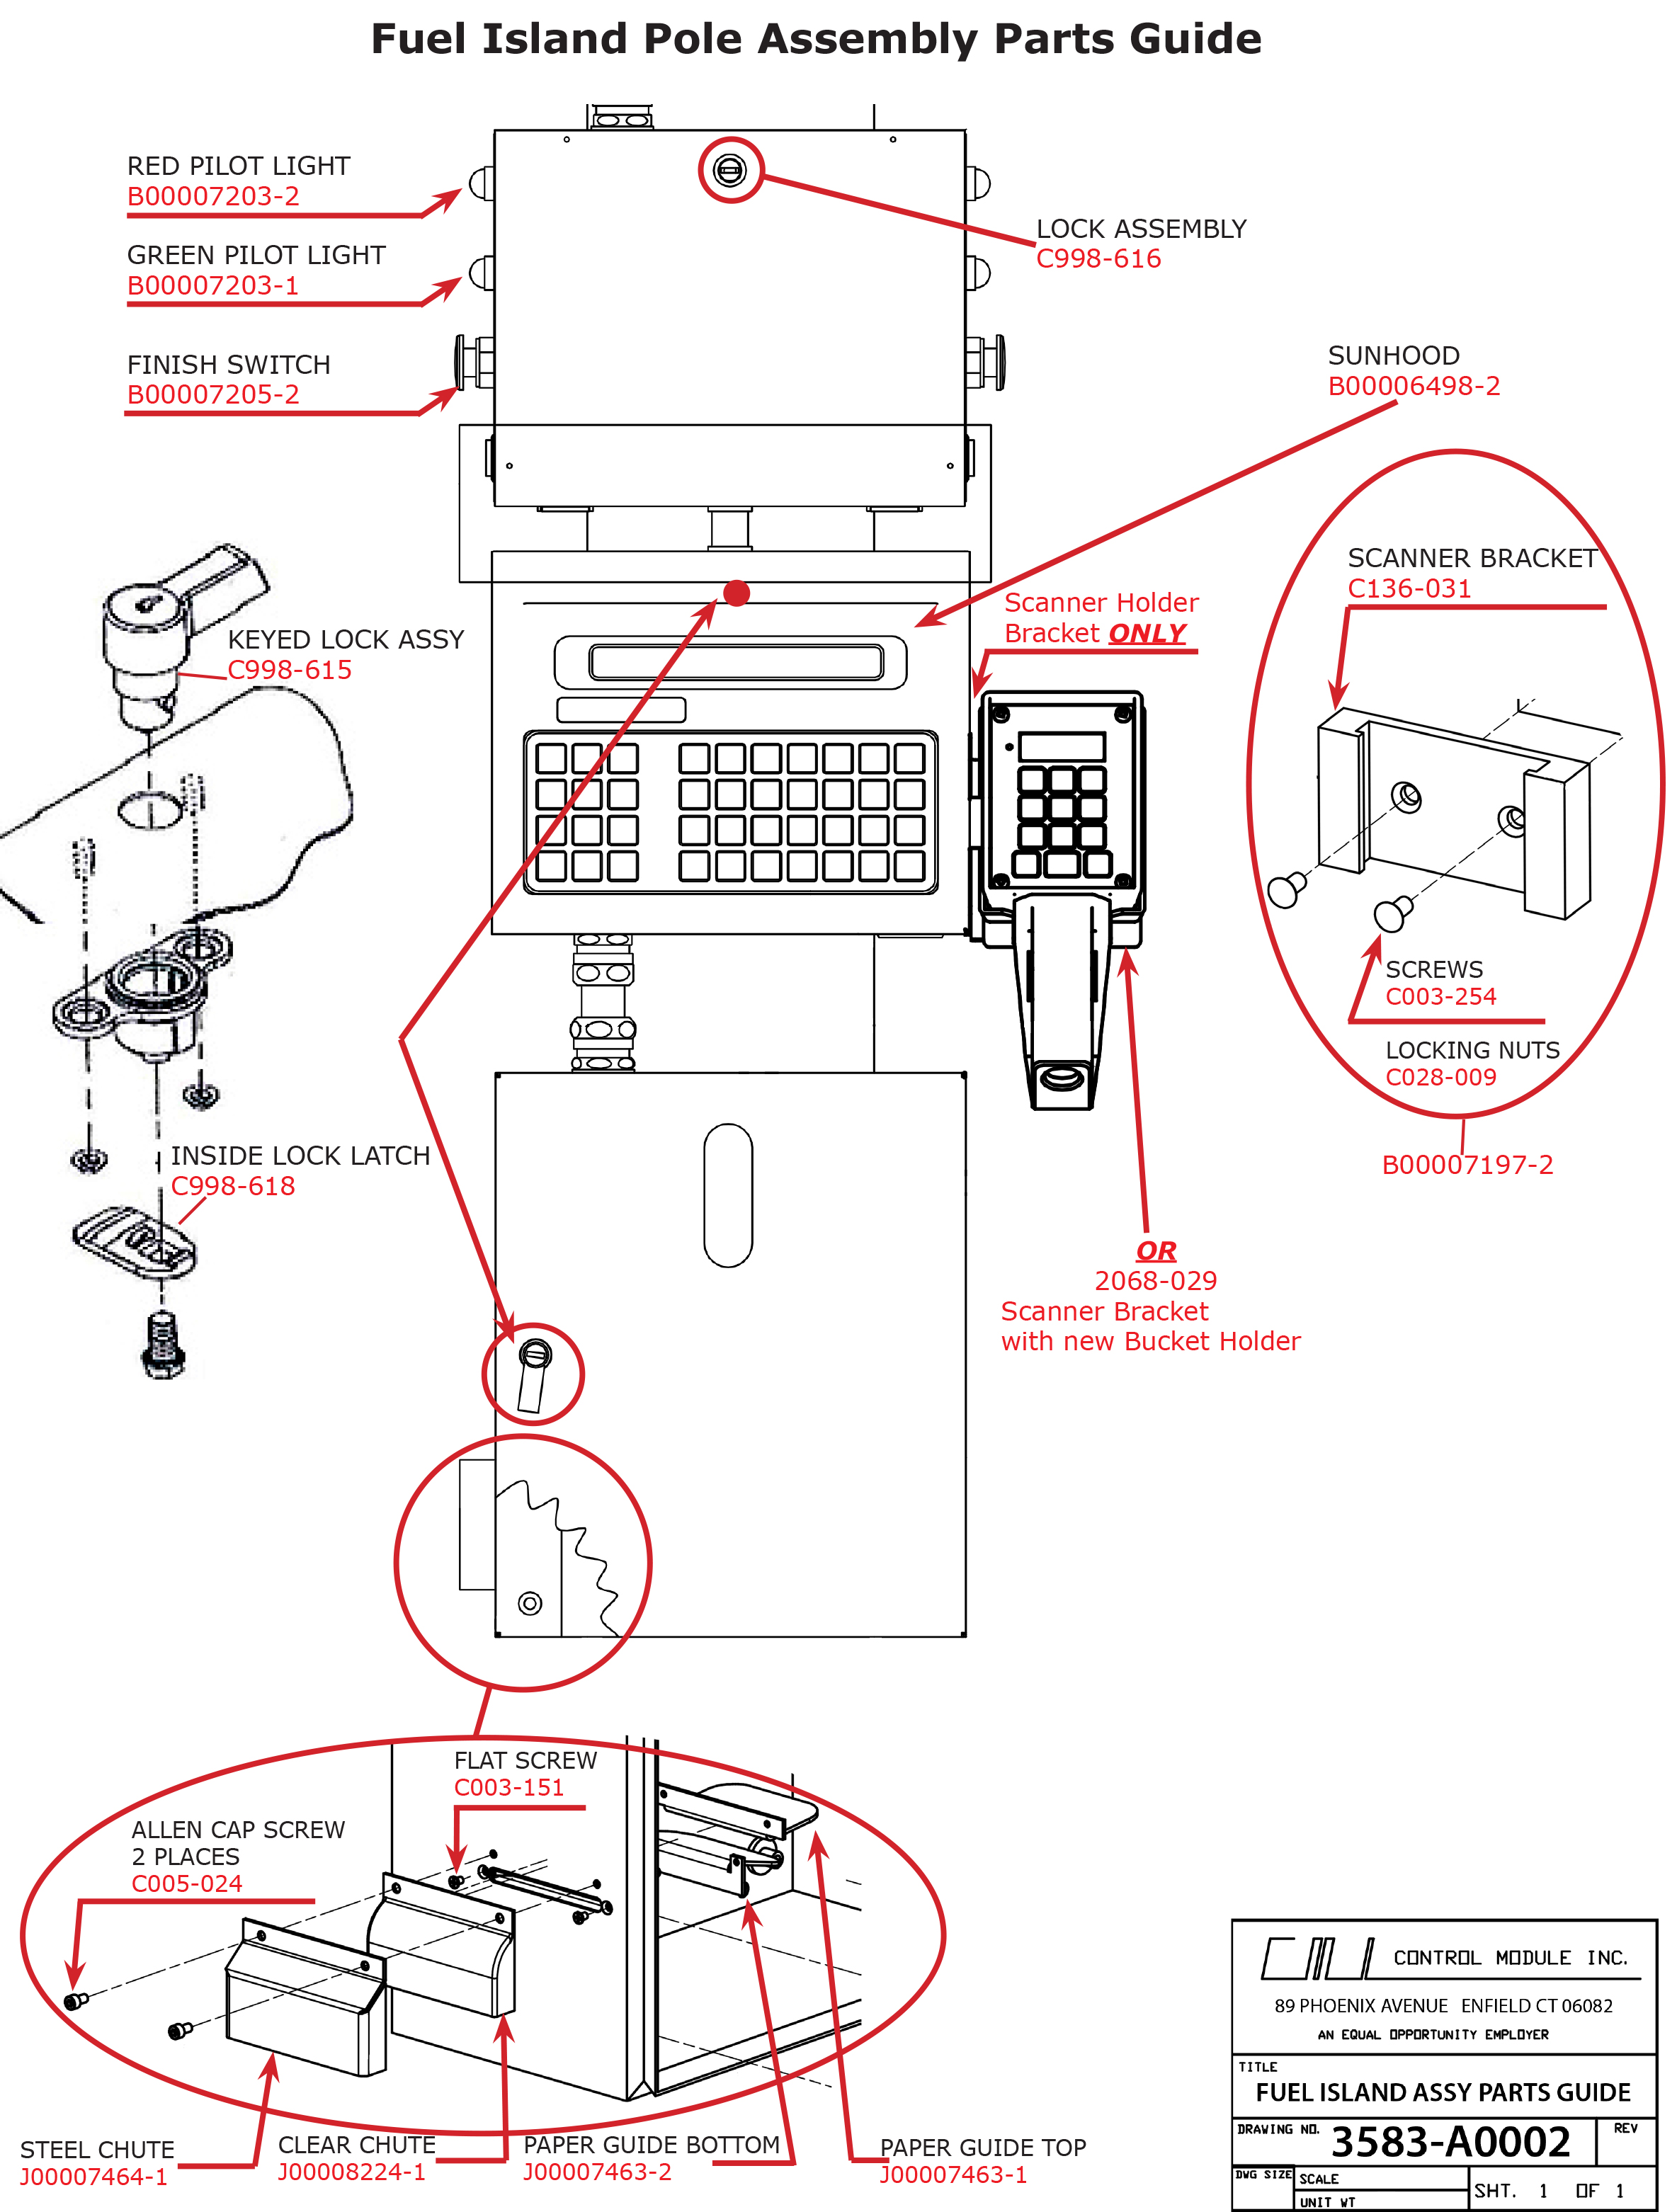 Industrial Design (Instructions for Replacement/Repair)